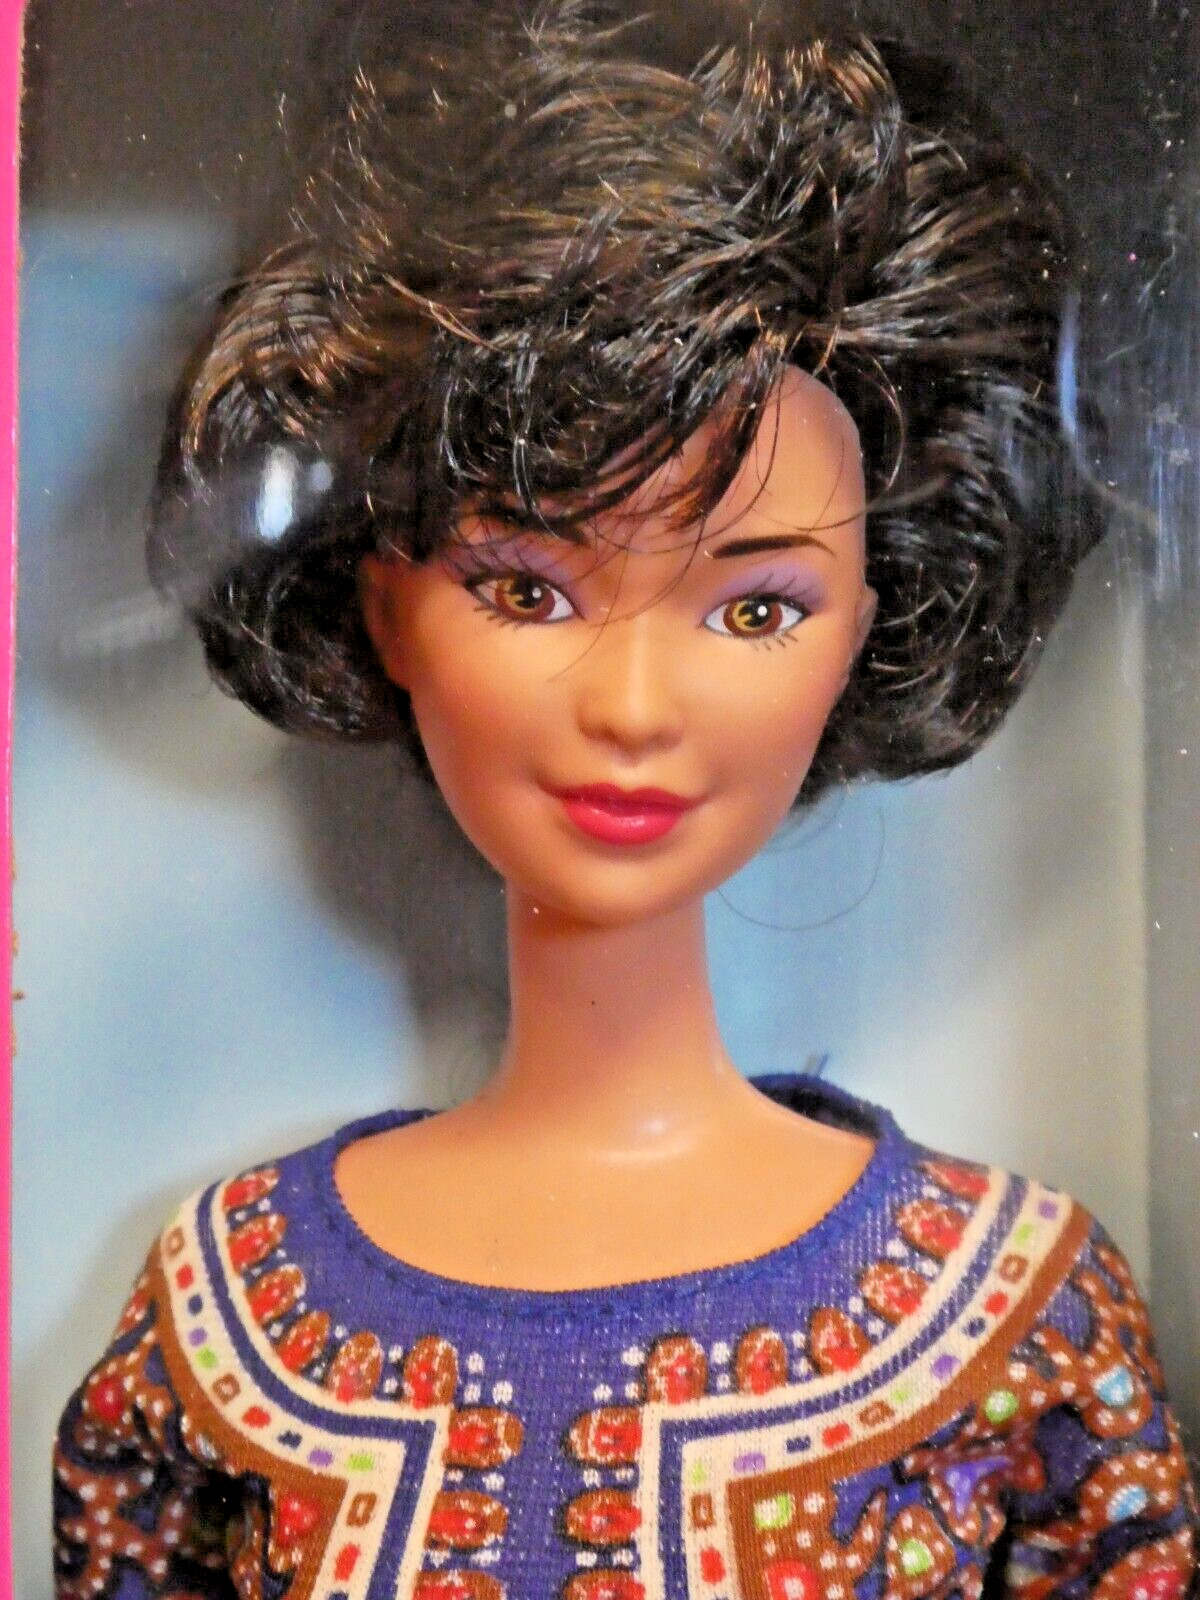 SIGNAPORE GIRL FROM SIGNAPORE AIRLINES LIMITED 1991 EDITION AMAZING FACE & HAIR